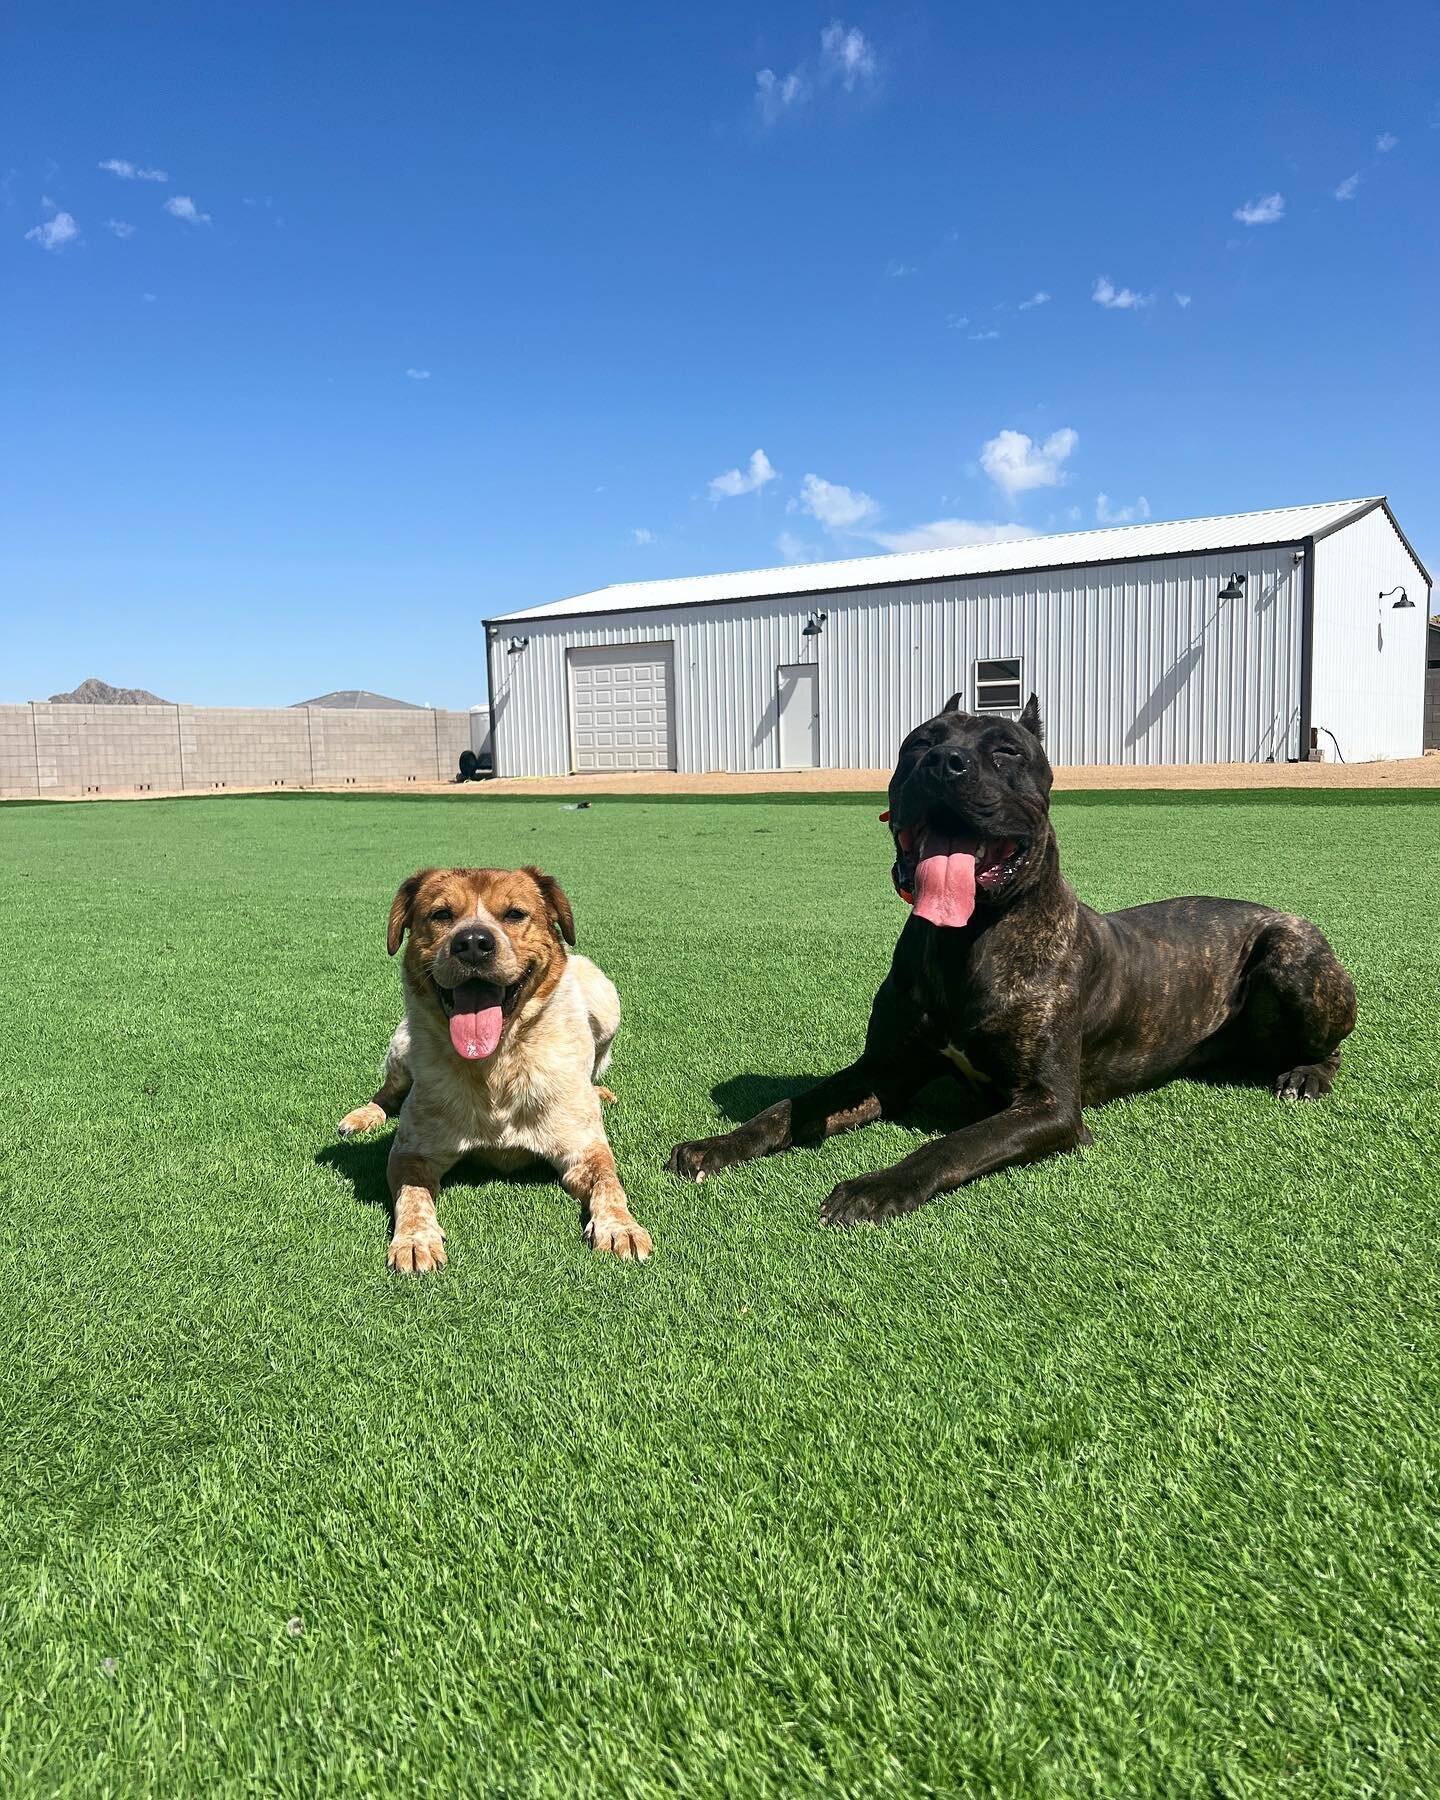 The new training field is up and the dogs are loving it! 😎
&bull;
&bull;
&bull;
#dogs#dogtrainer#dogtraining#dogsofinstagram#canecorso#rescuedog#pettraining#puppytraining#arizona#arizonadogtraining#instadog#doglife#dogobedience#boardandtrain#progres